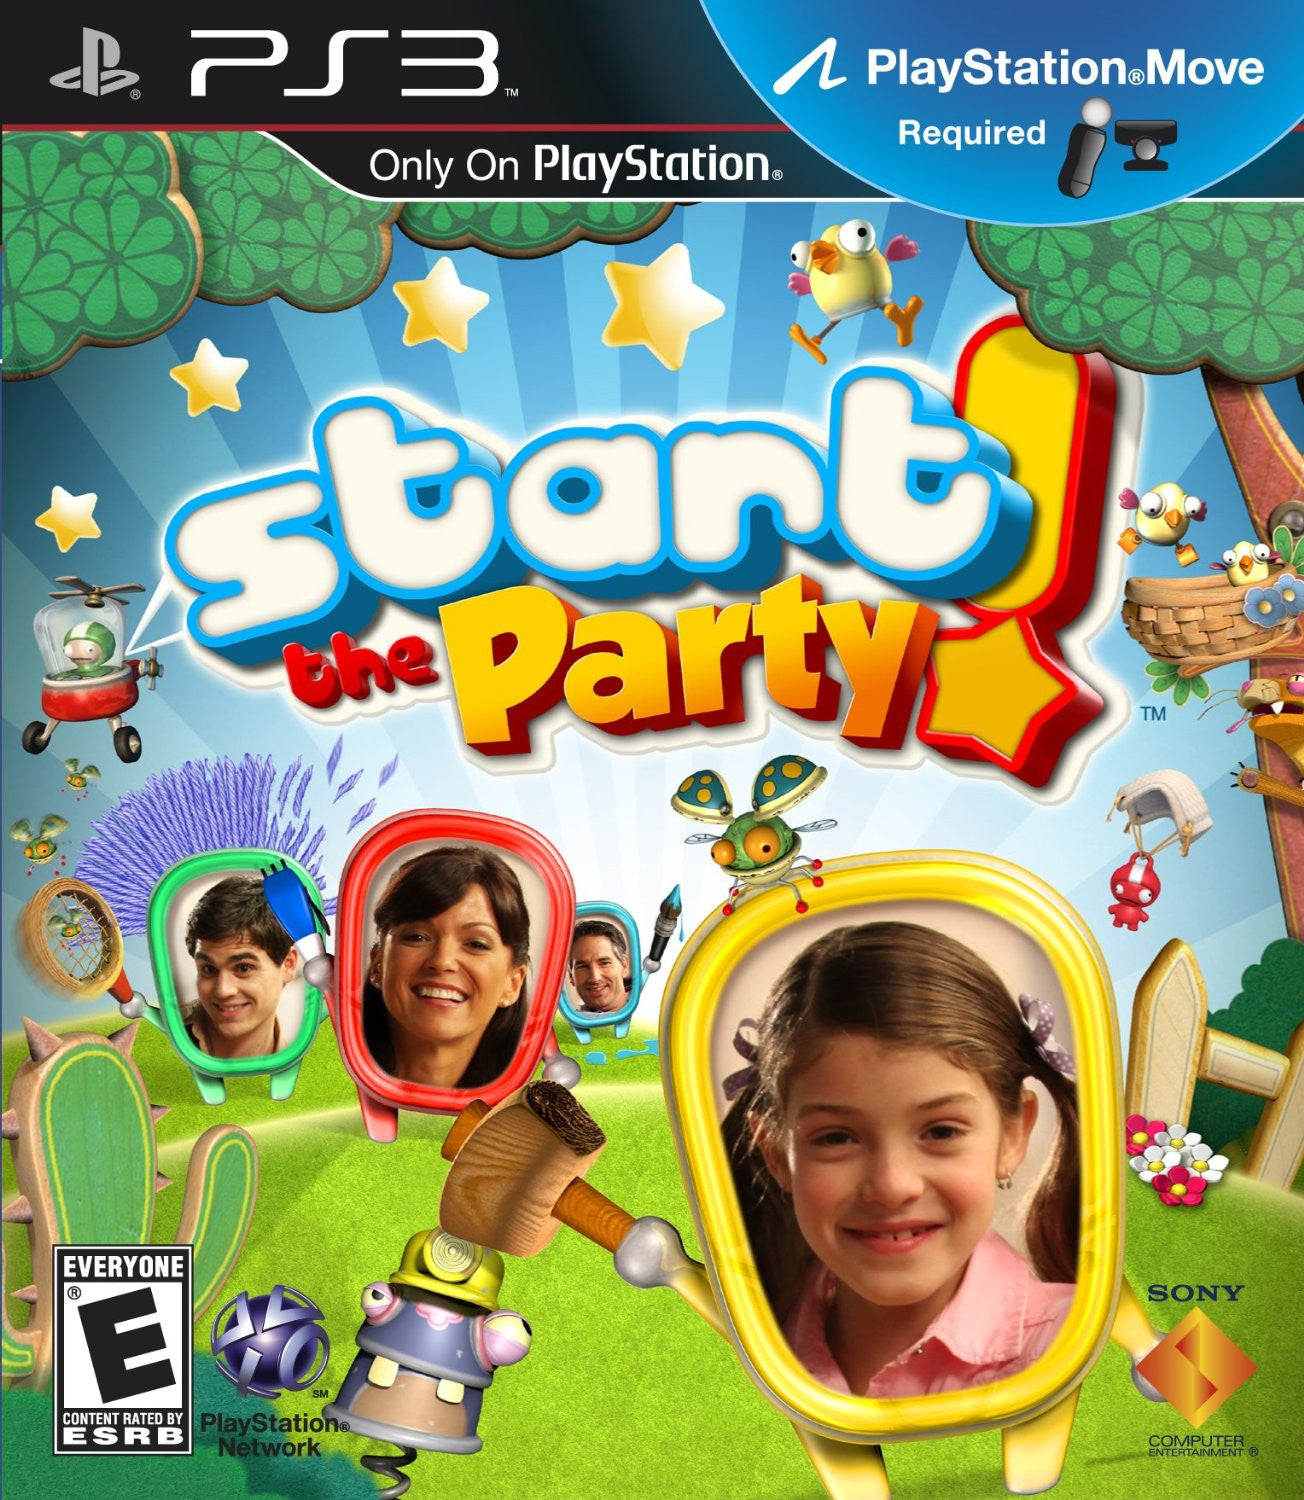 Start the Party (Motion Control) - Playstation 3